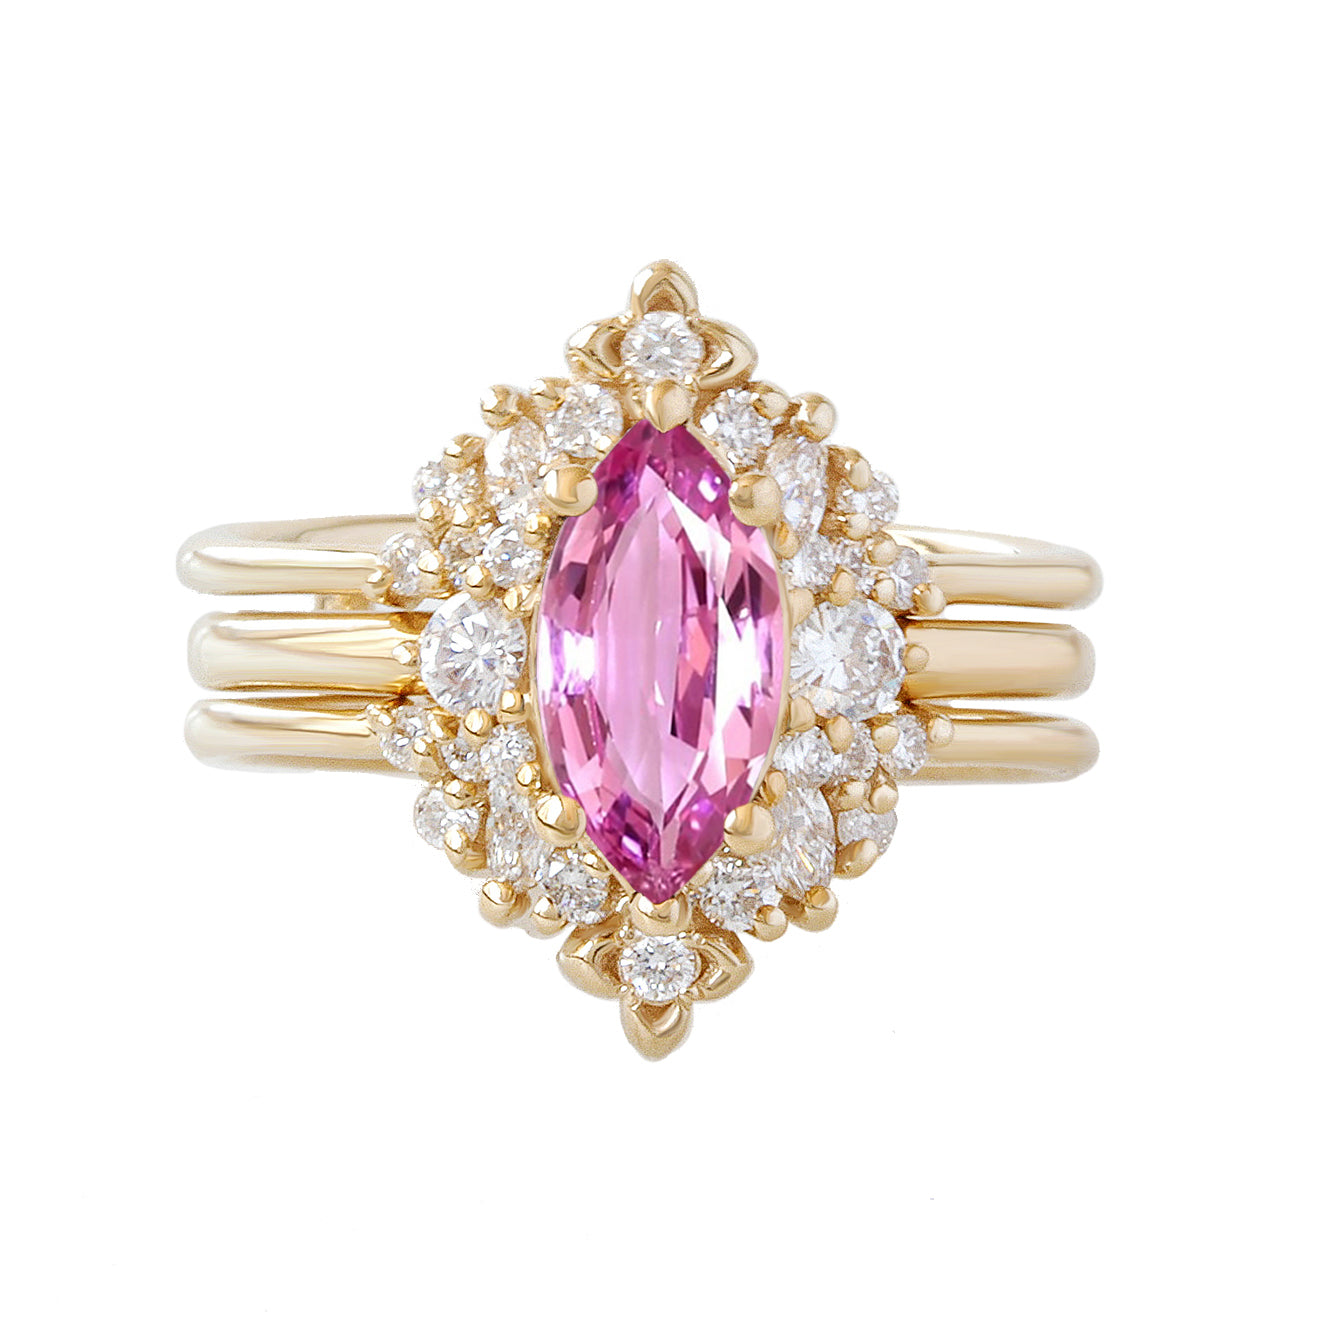 Marquise pink sapphire diamonds detailed engagement ring “Isabella” with Orchid ring guard ♥